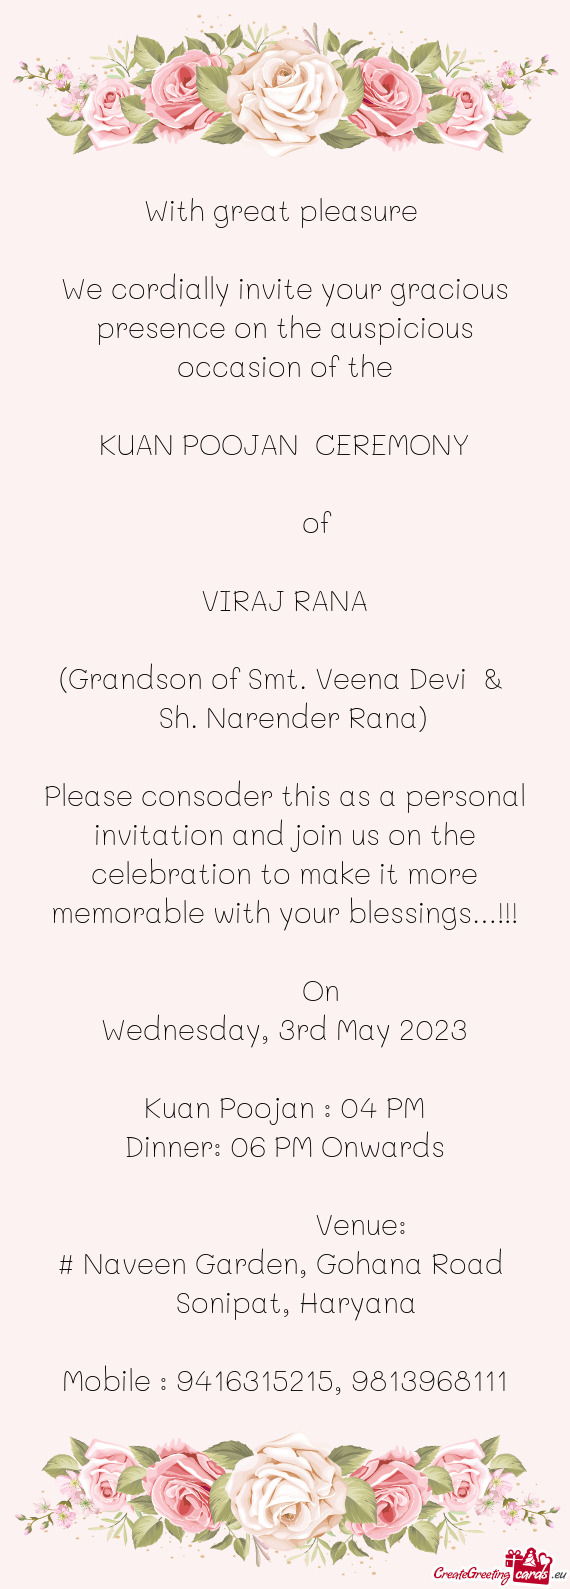 We cordially invite your gracious presence on the auspicious occasion of the